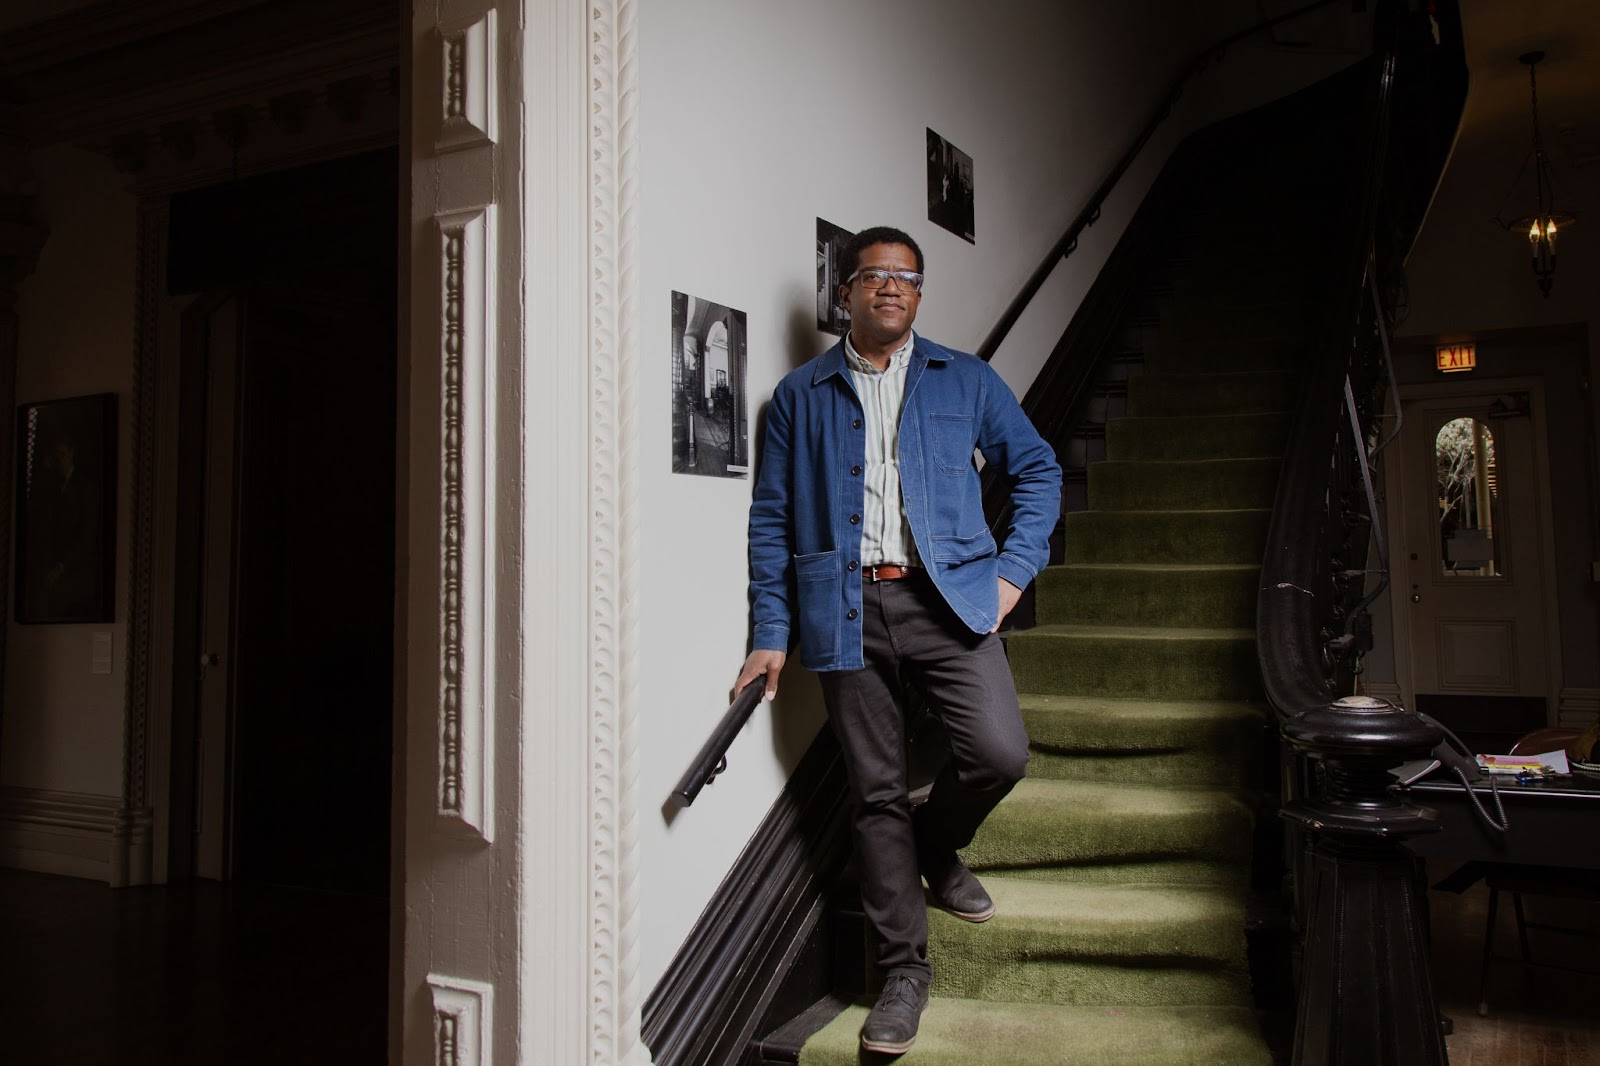 Image: Ross Stanton Jordan stands on the bottom stairs of a dark brown and bright green staircase at the Jane Addams Hull House Museum. On the wall next to hum are historic images. In the background you can see into other unlit parts of the building, with an exit sign glowing above the door at the end of the right corridor. Photo by Joshua Clay Johnson.